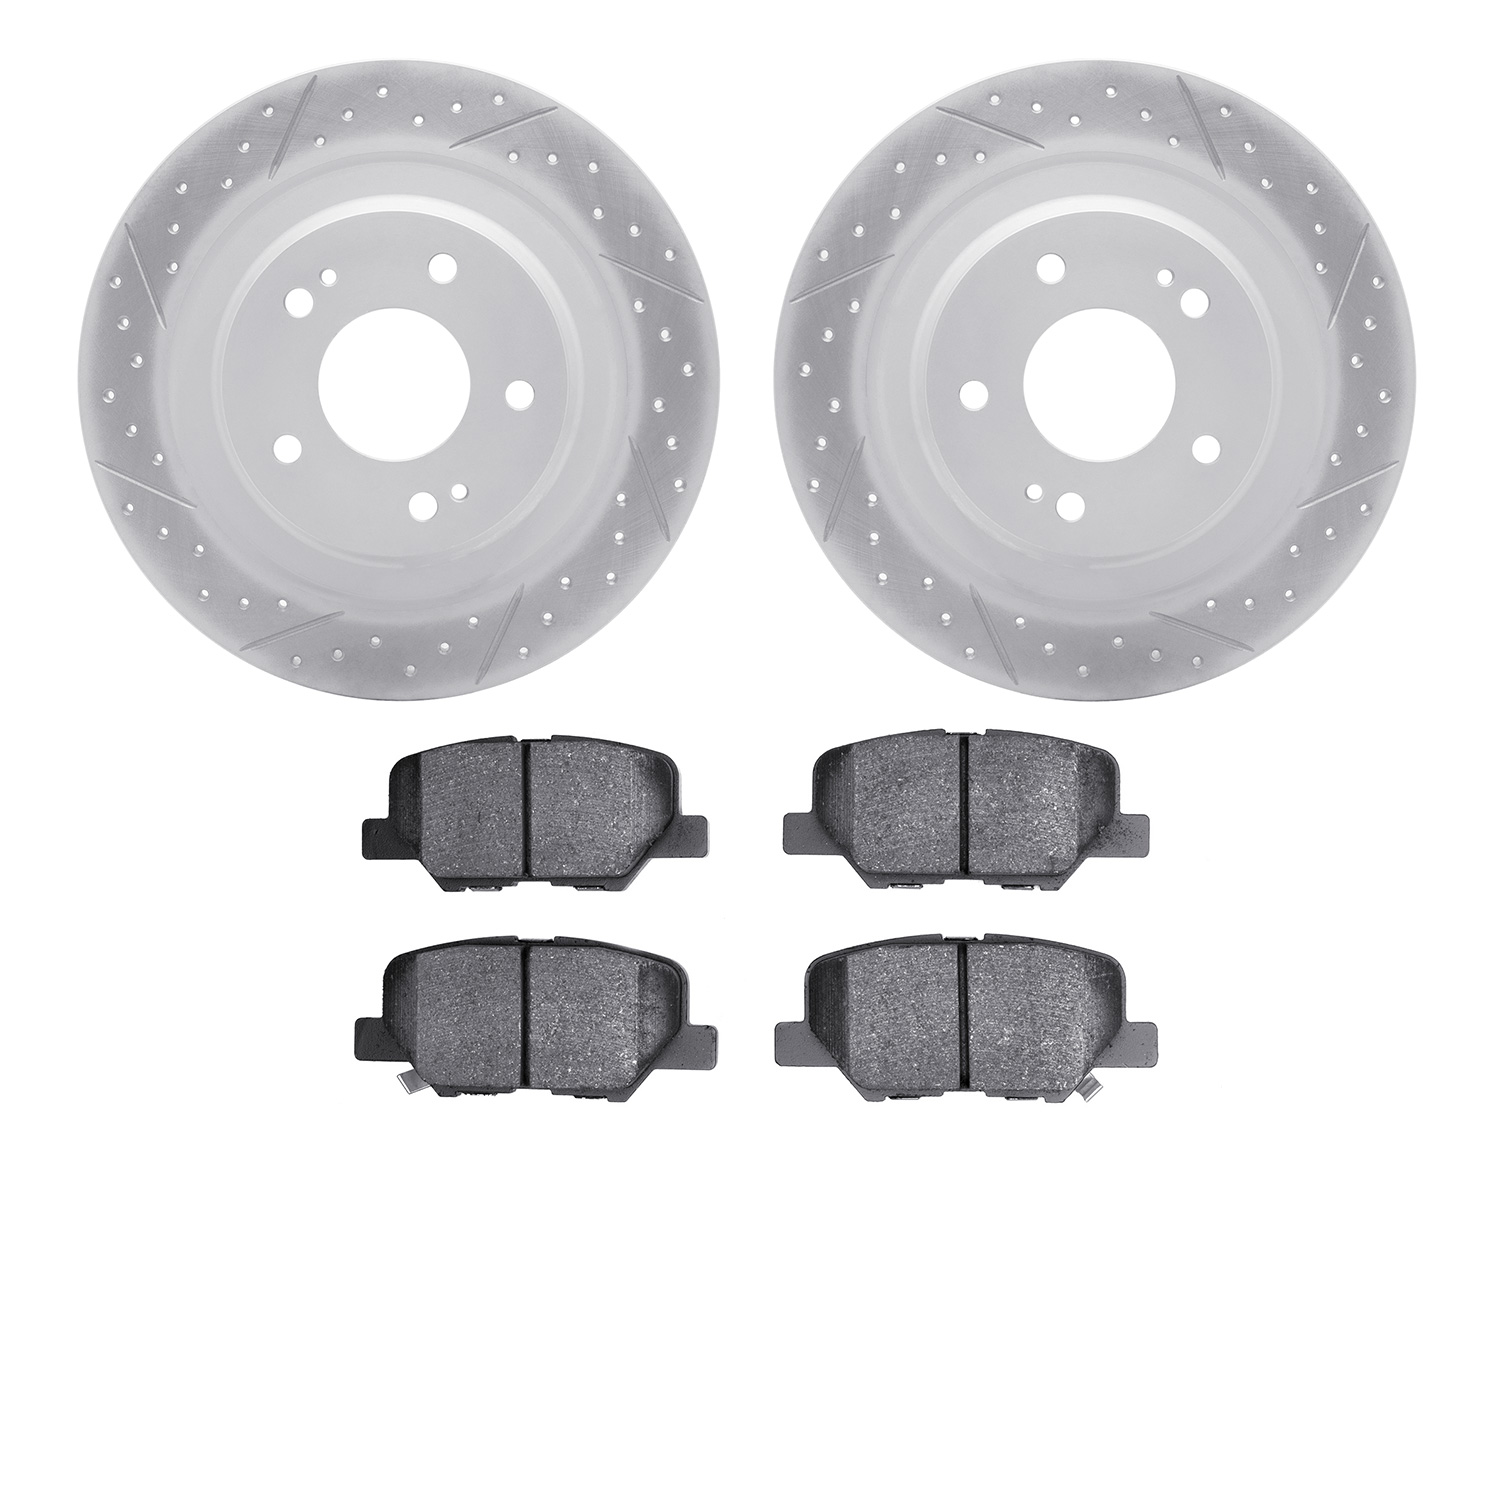 2502-72087 Geoperformance Drilled/Slotted Rotors w/5000 Advanced Brake Pads Kit, Fits Select Mitsubishi, Position: Rear